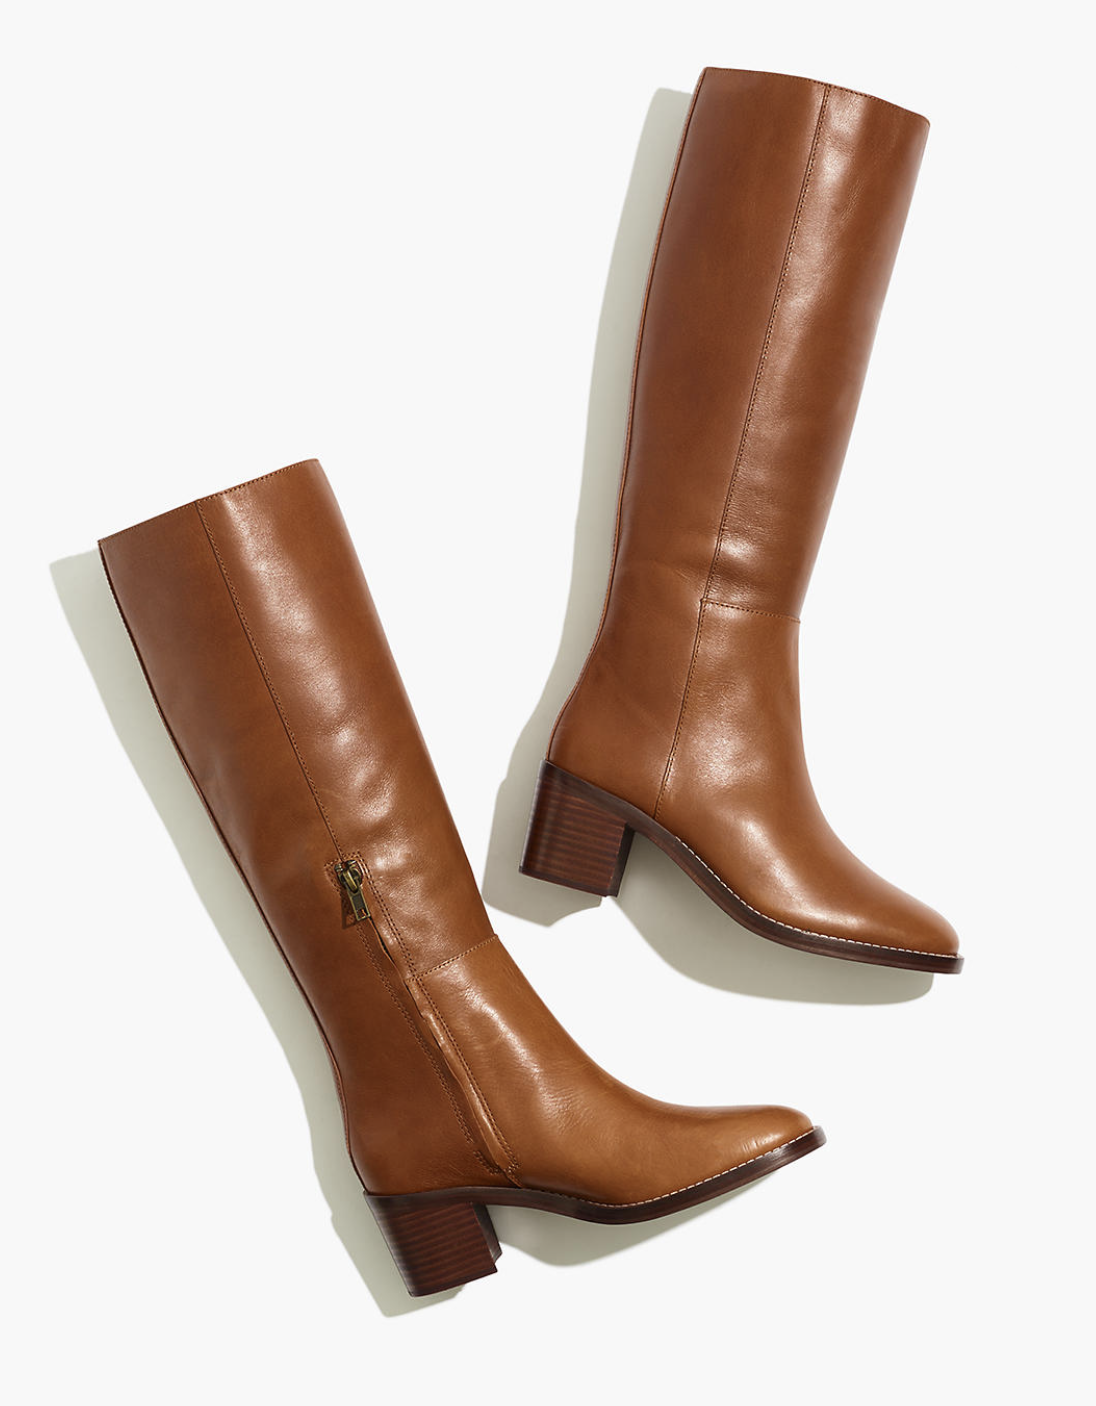 Recent Finds 9/30 - Madewell Francie Tall Boot